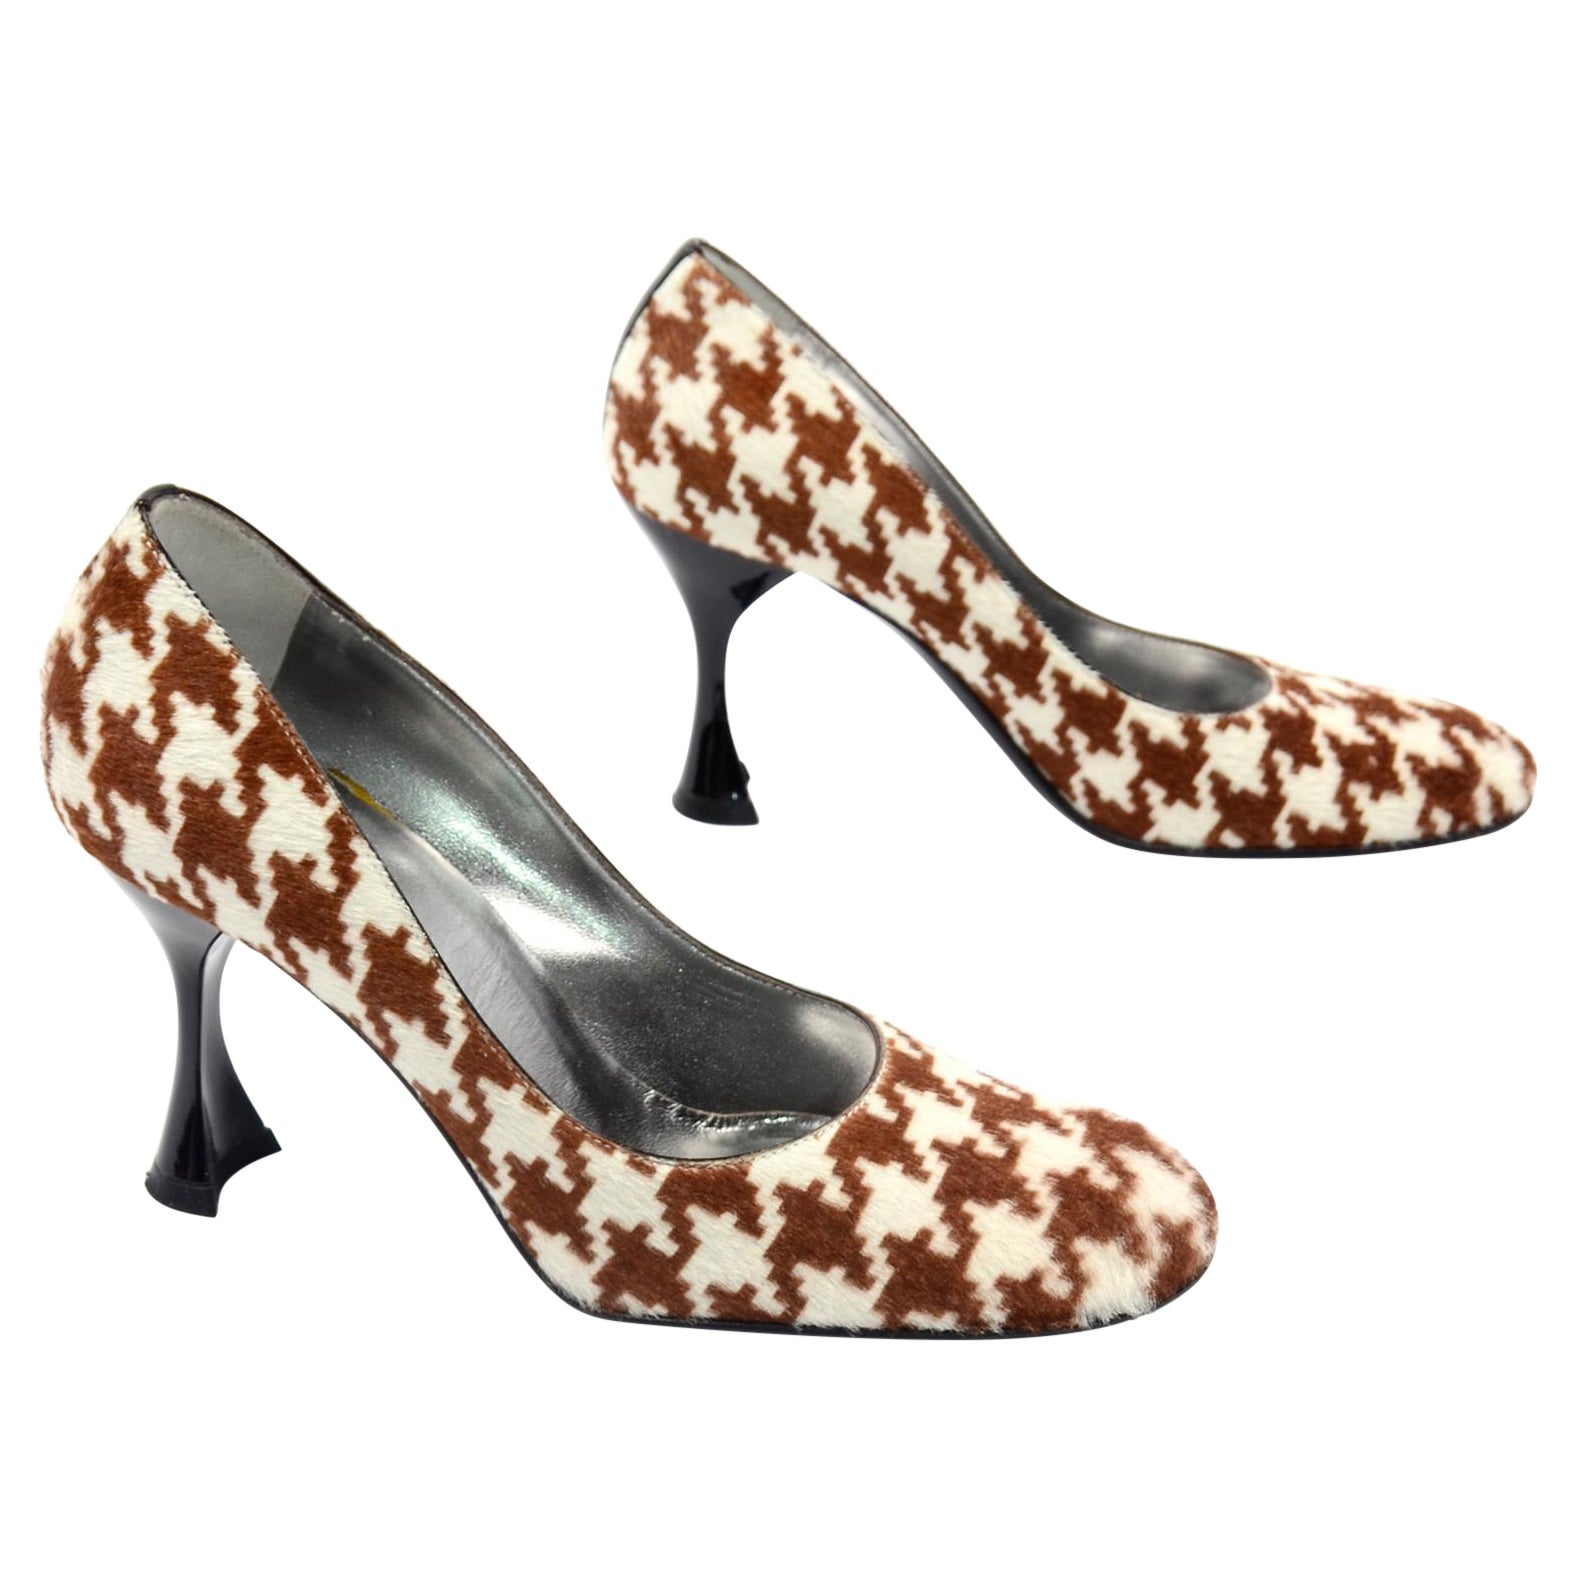 Dolce & Gabbana Brown and White Houndstooth Pumps w Round Toe & Flared Heels